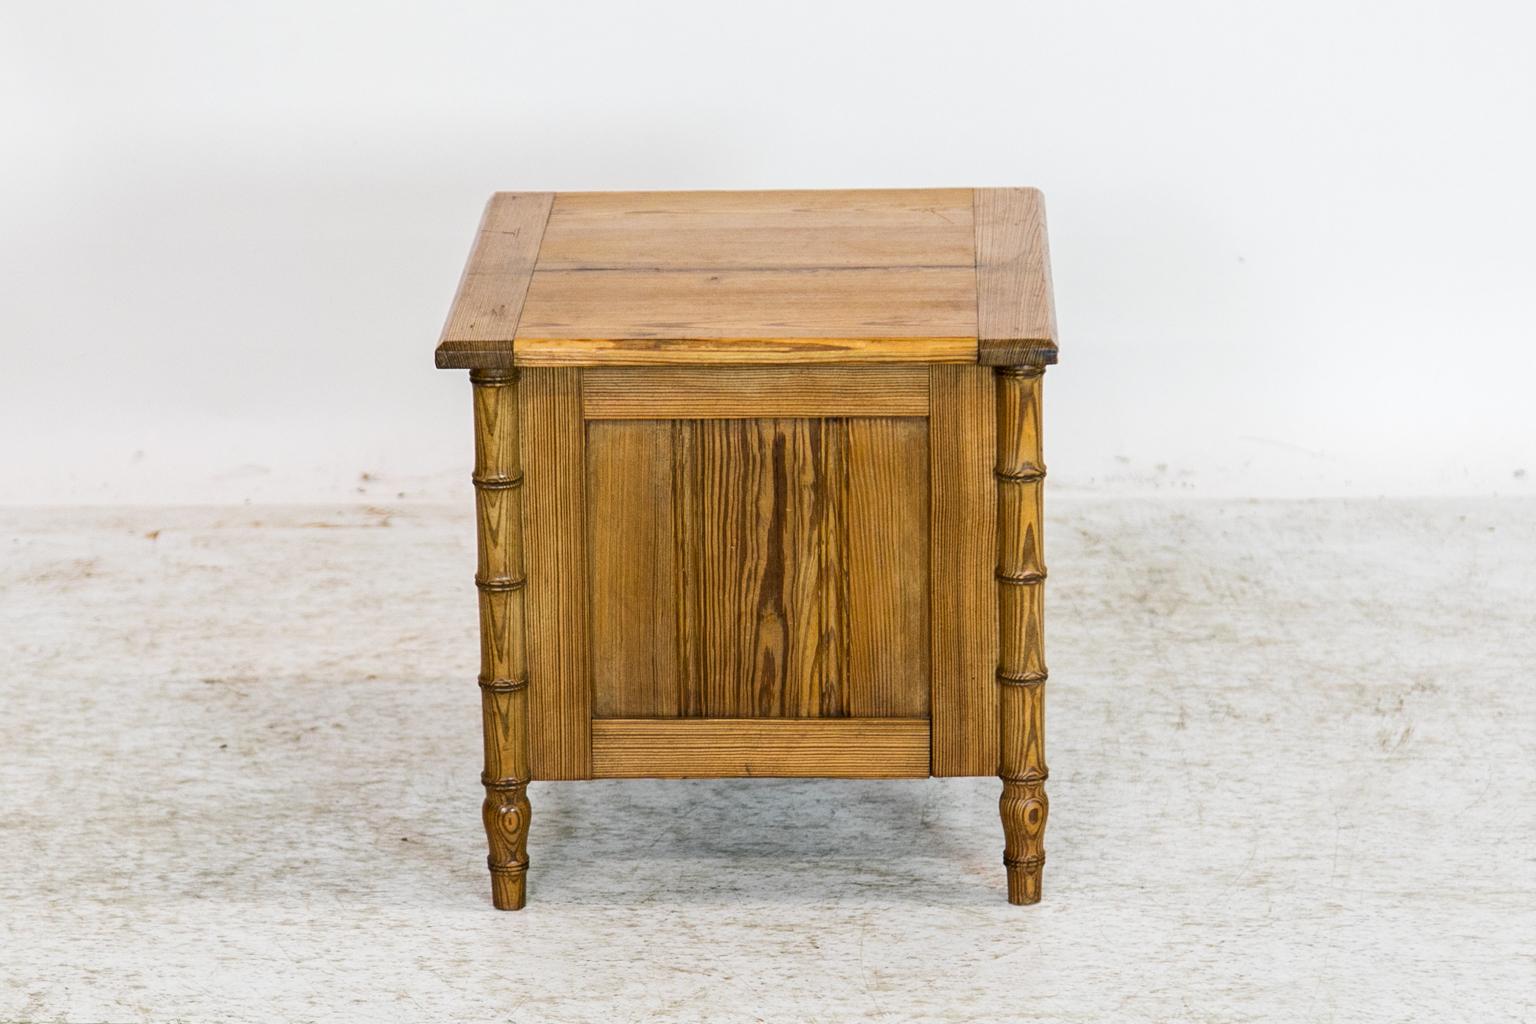 The front legs of this pine commode are turned in a faux bamboo motif. The front has a recessed panel. The interior has been altered to remove the potty cupboard. The left side has a 1/8-inch shrinkage separation. The top has a one-inch separation